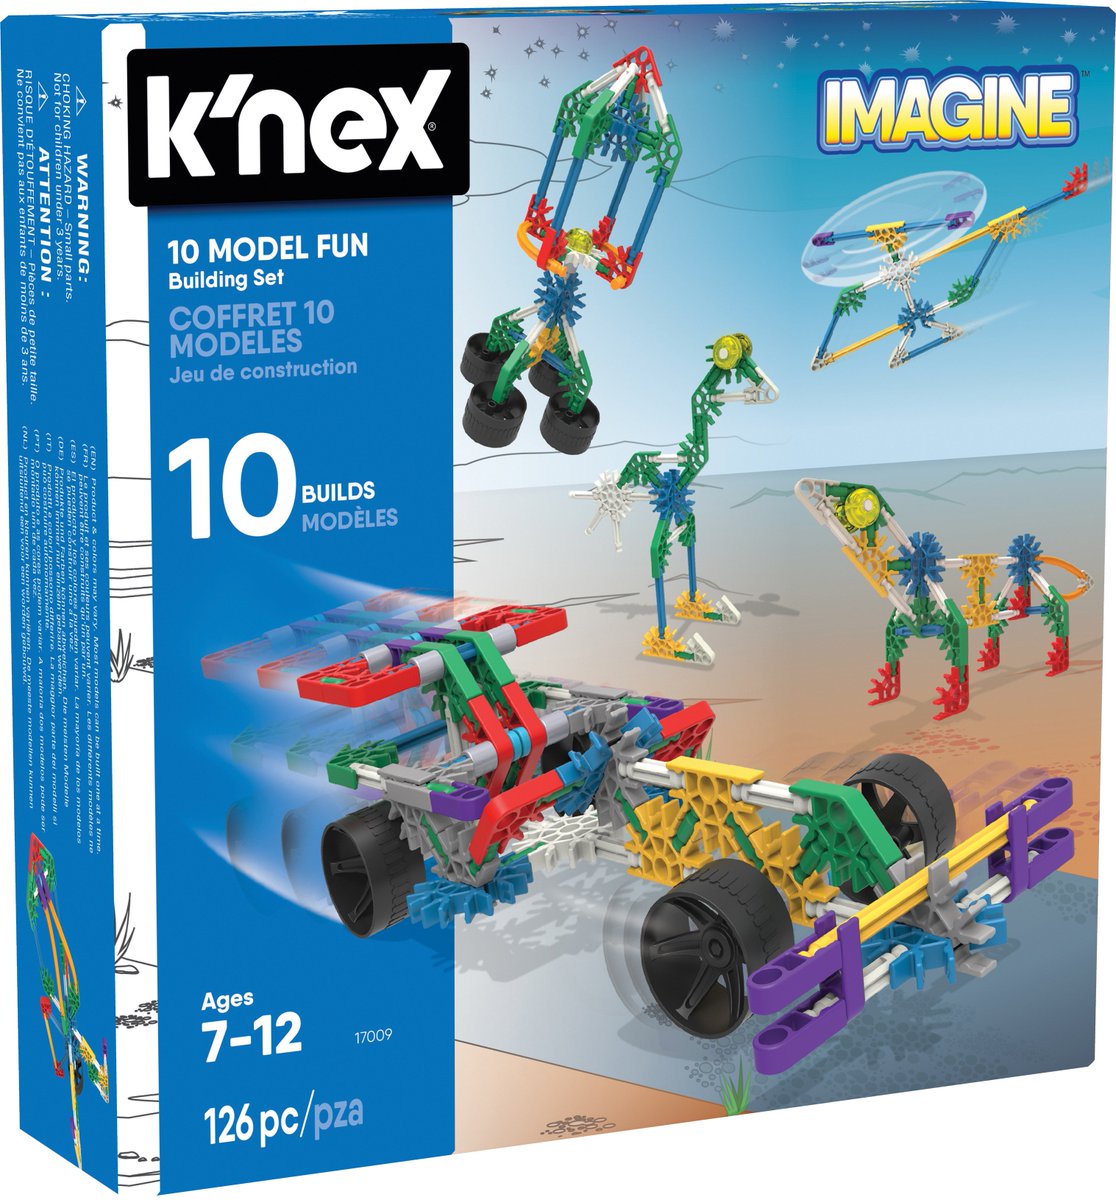 #Congrats to #KNEXmas winner @Livvycornford who has won a @KNEXUK 10 Model Building Fun Set! Please DM us with your postal address so we can send your prize!